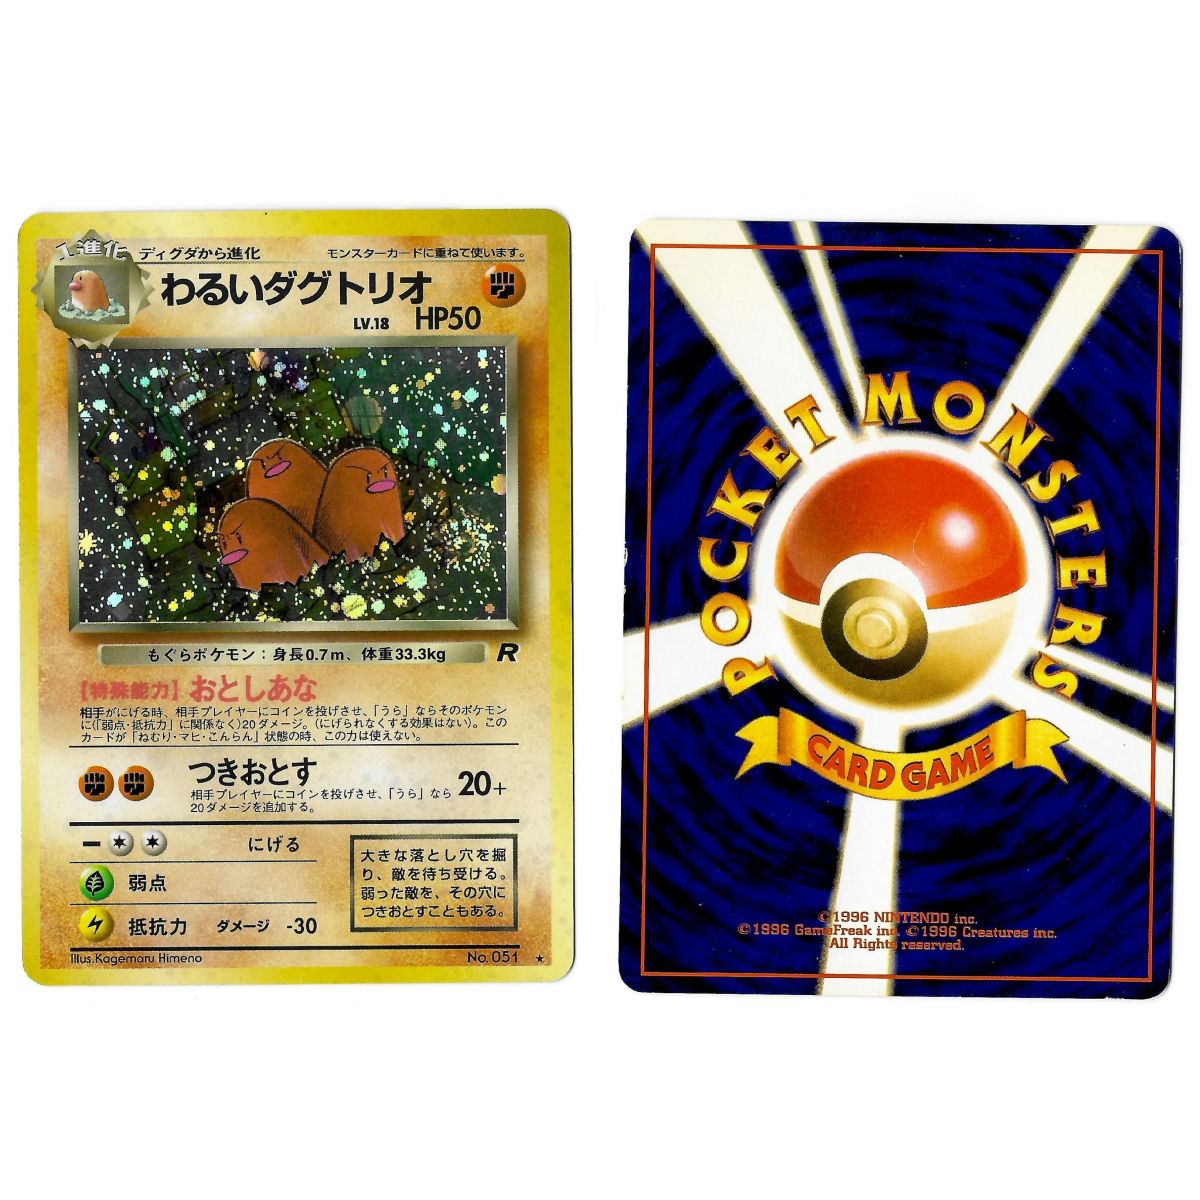 Item Dark Dugtrio (4) No.051 Rocket Gang TR Holo Unlimited Japanese View Scan